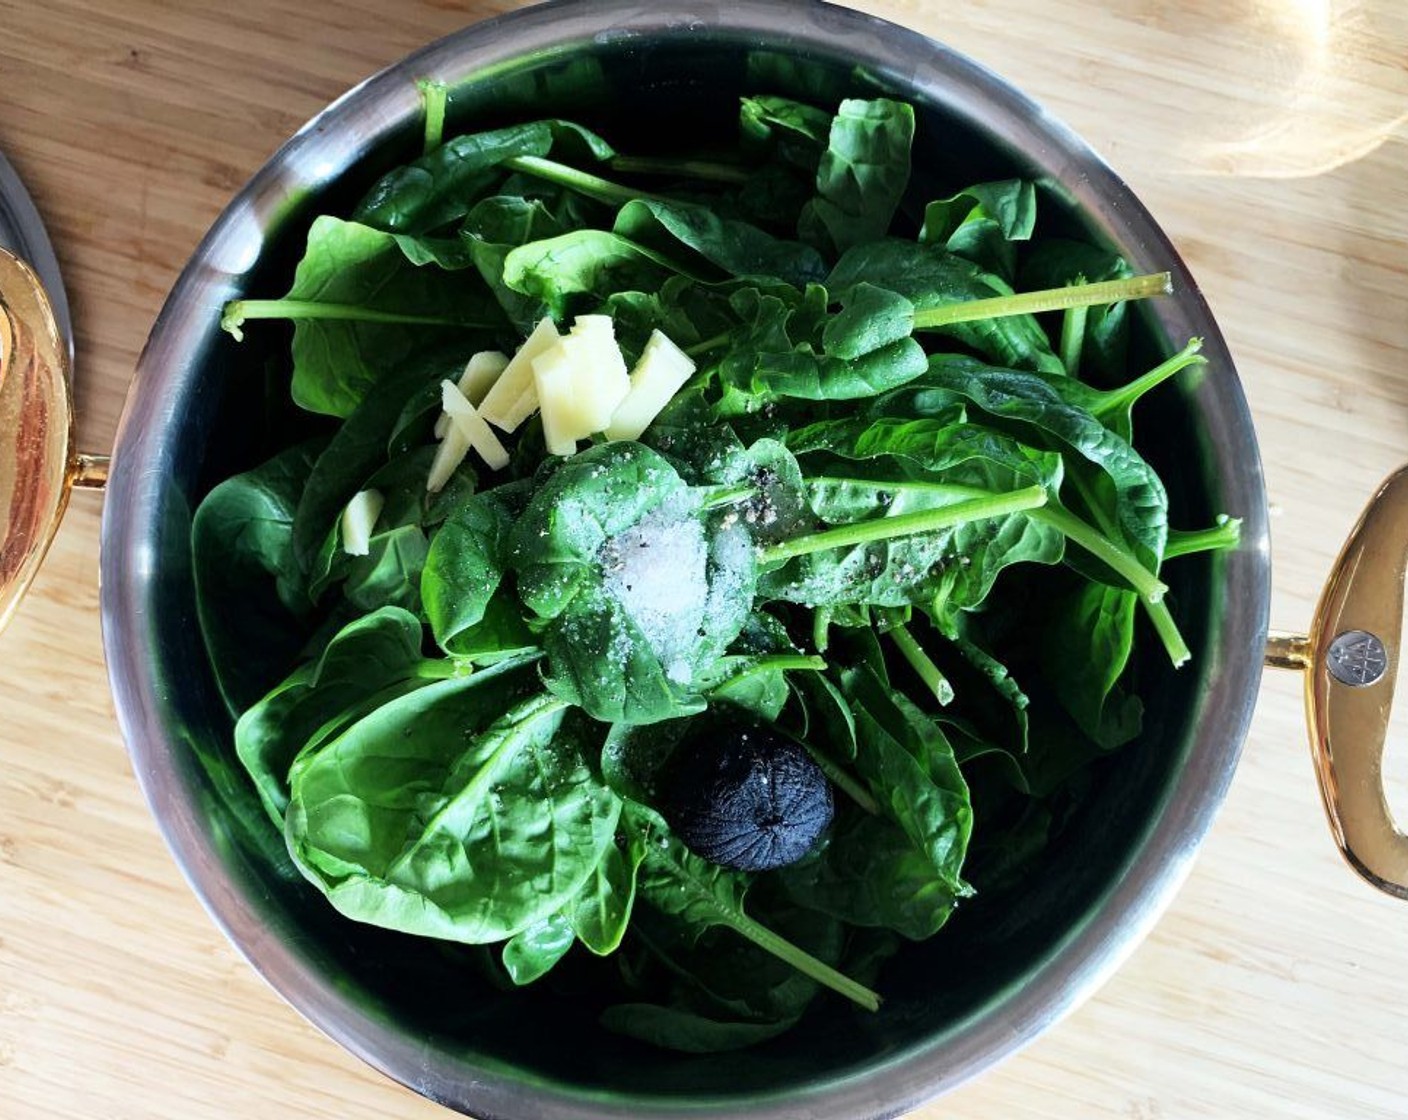 step 1 In a large pot, place Fresh Baby Spinach (16 2/3 cups), Black Garlic (1 clove), Himalayan Rock Salt (1 tsp), Ground Black Pepper (to taste), and about 2 cups of Water (to taste).